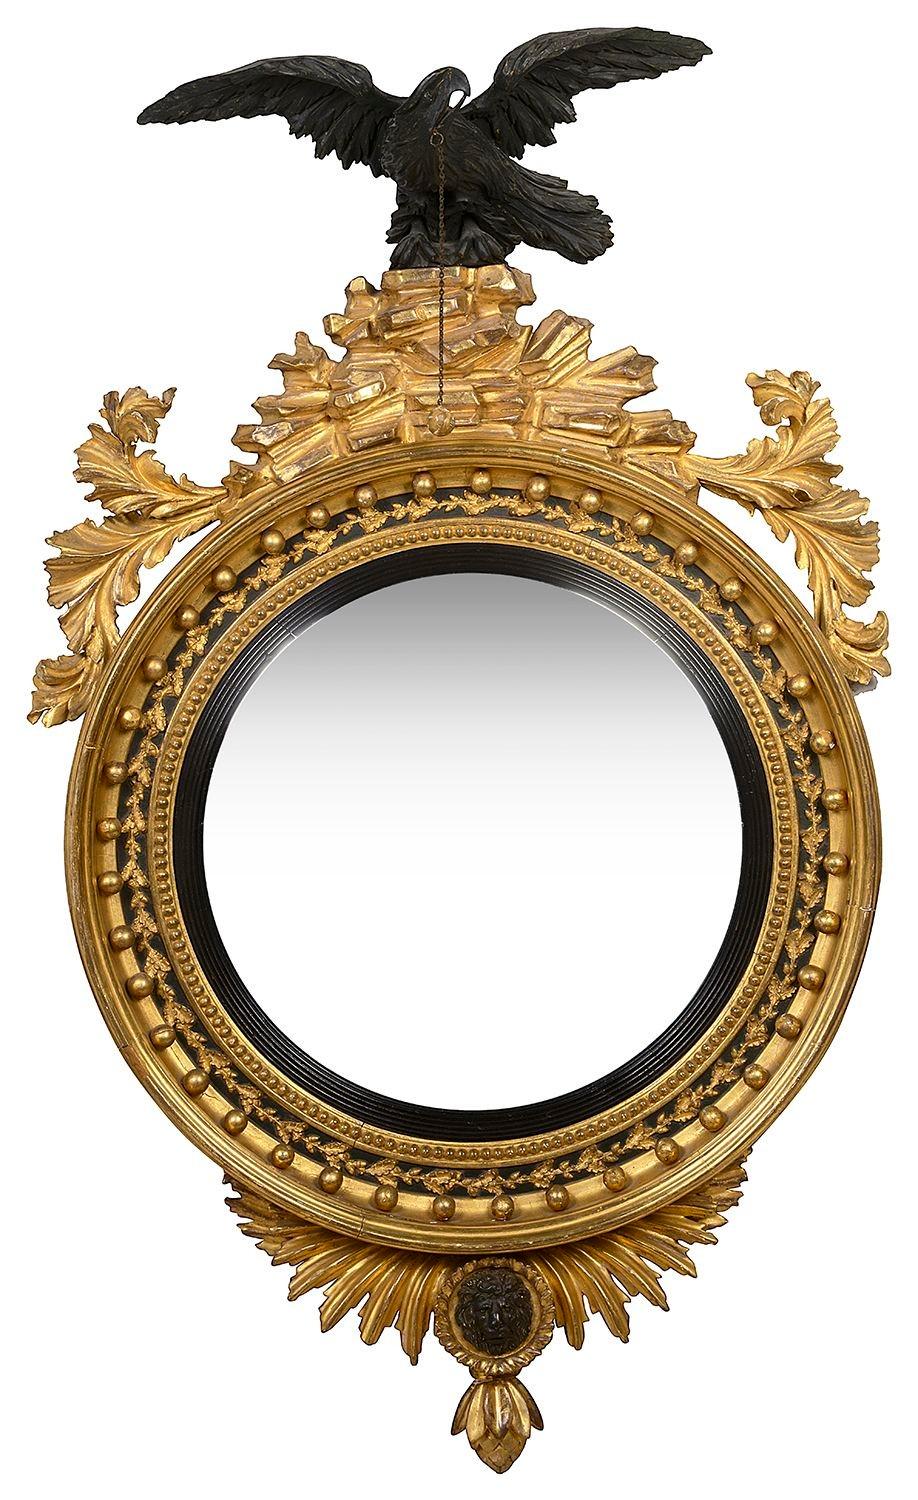 A magnificent pair of Regency period carved giltwood convex wall mirror, having ebonized eagles perched above the carved rocky outcrops, scrolling leaf decoration either side, inset gilded balls surrounding the ebonized reeded slip and the convex